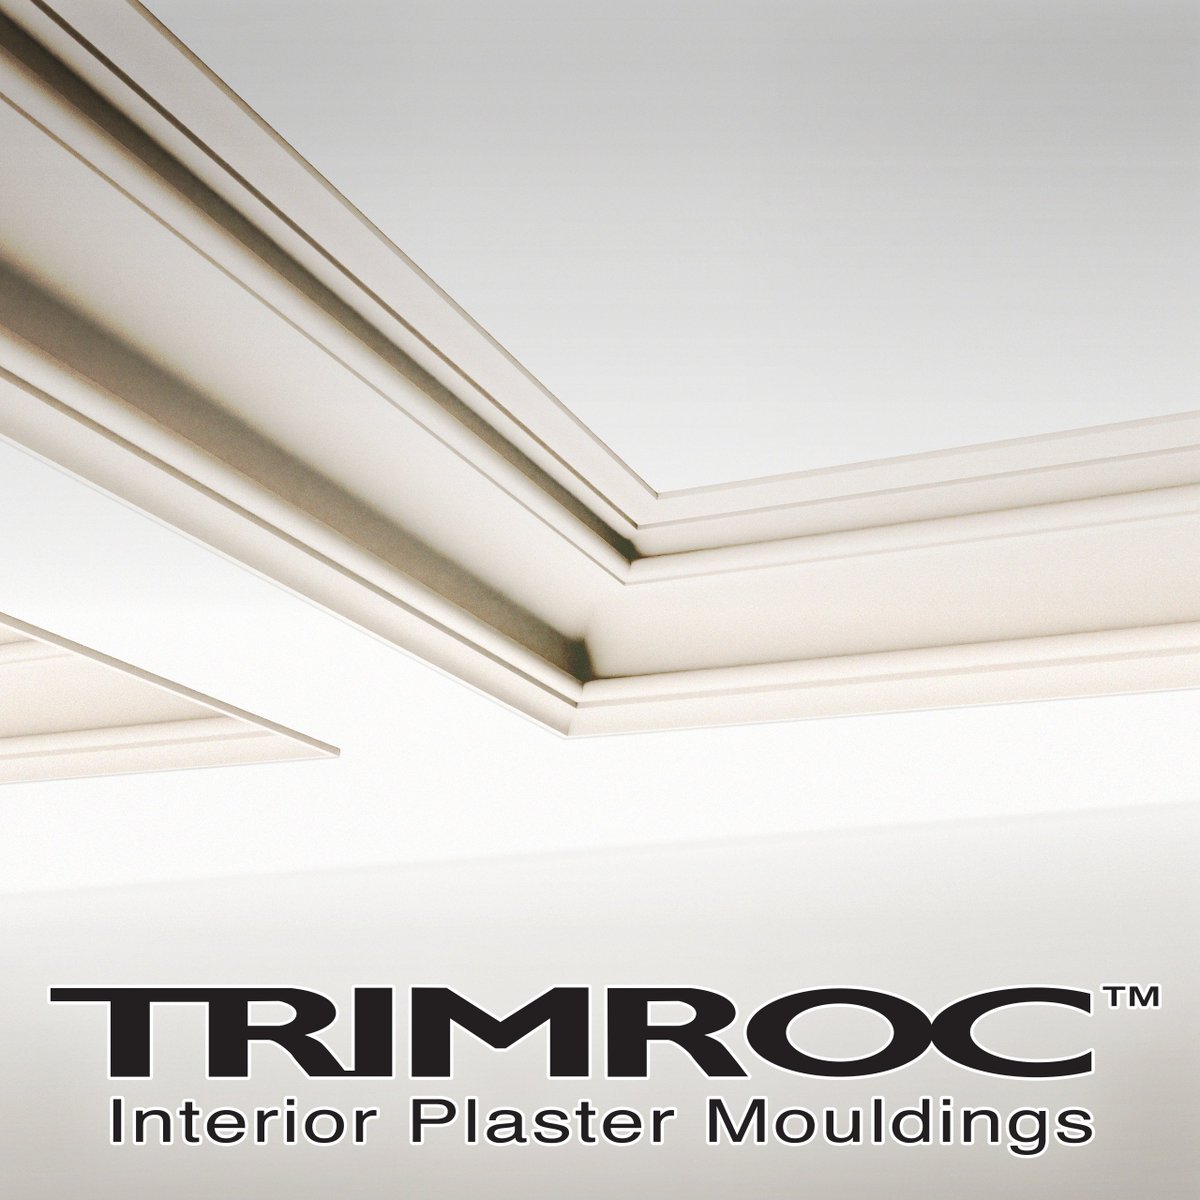 Give your ceilings interest and appeal with beams and custom ceilings by TRIMROC™.

#interiorliving #interiorlovers #interiordesign #interiorliving #interiorlovers #designinterior #interiordecorating #designinspo #designicon #designlover #kitchendesign #designconsultants